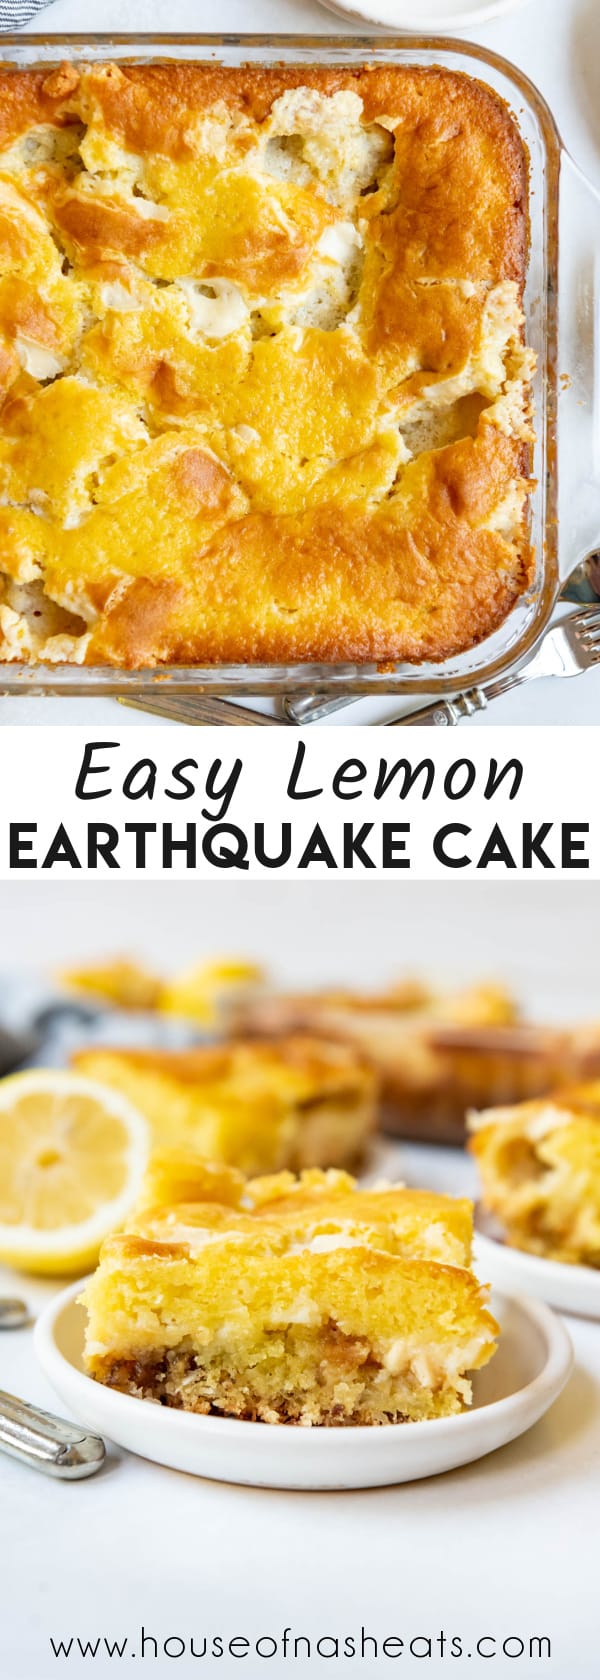 A collage of images of lemon earthquake cake with text overlay.